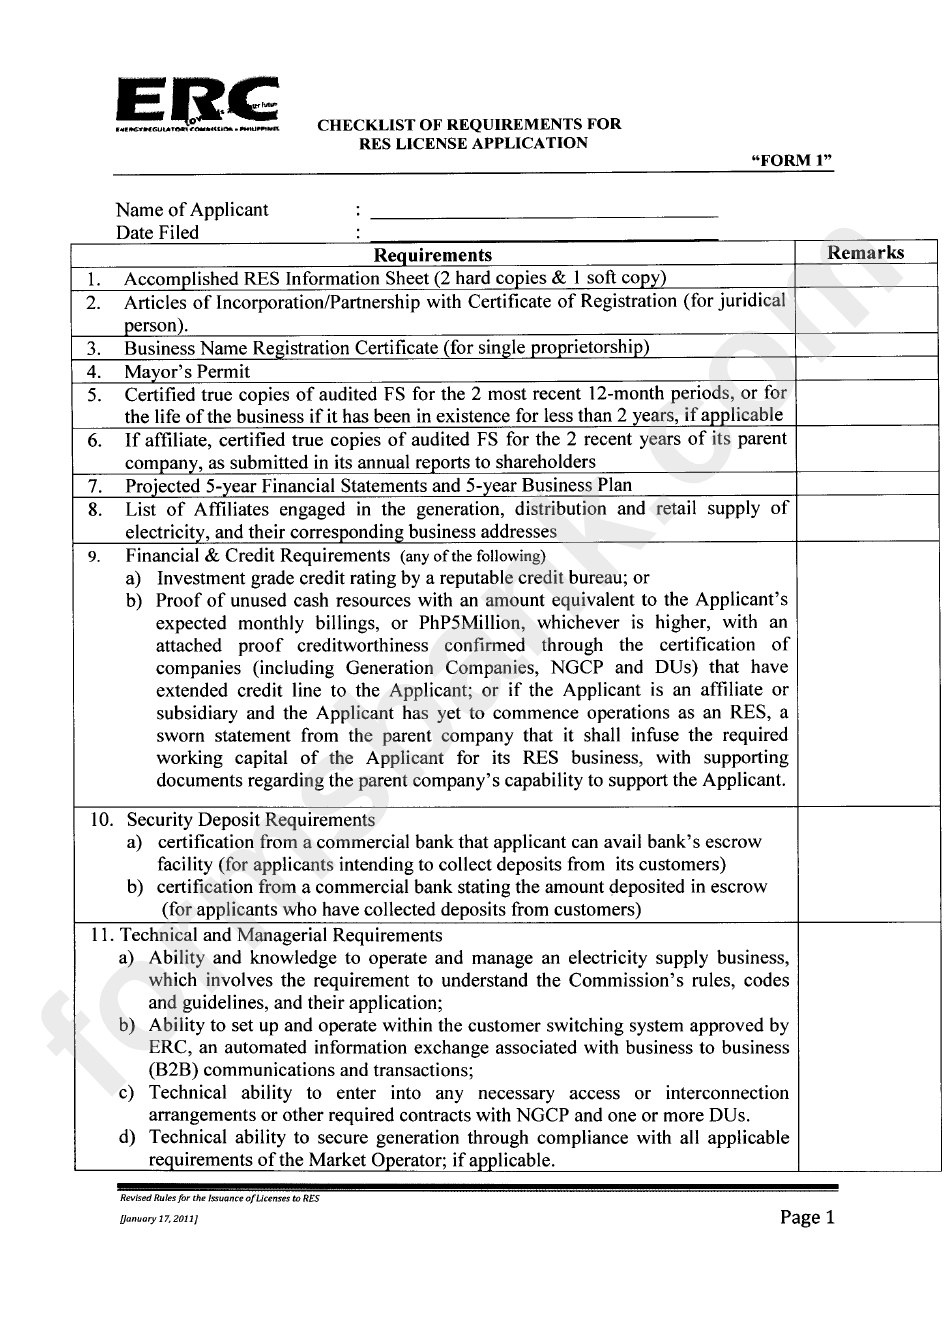 Form 1 - Checklist Of Requirements For Res License Application